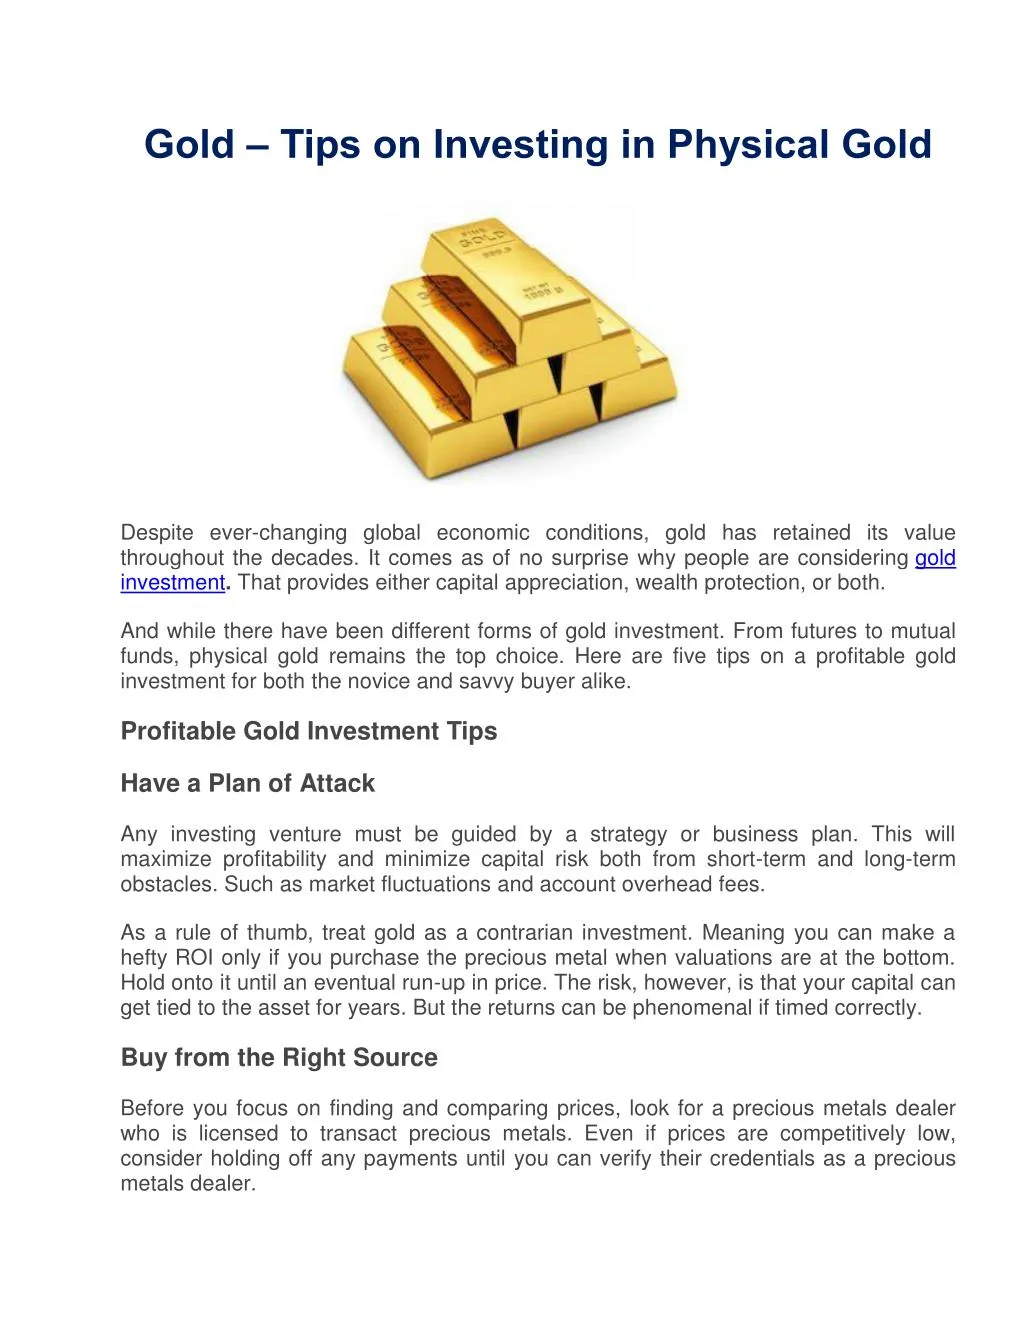 gold tips on investing in physical gold